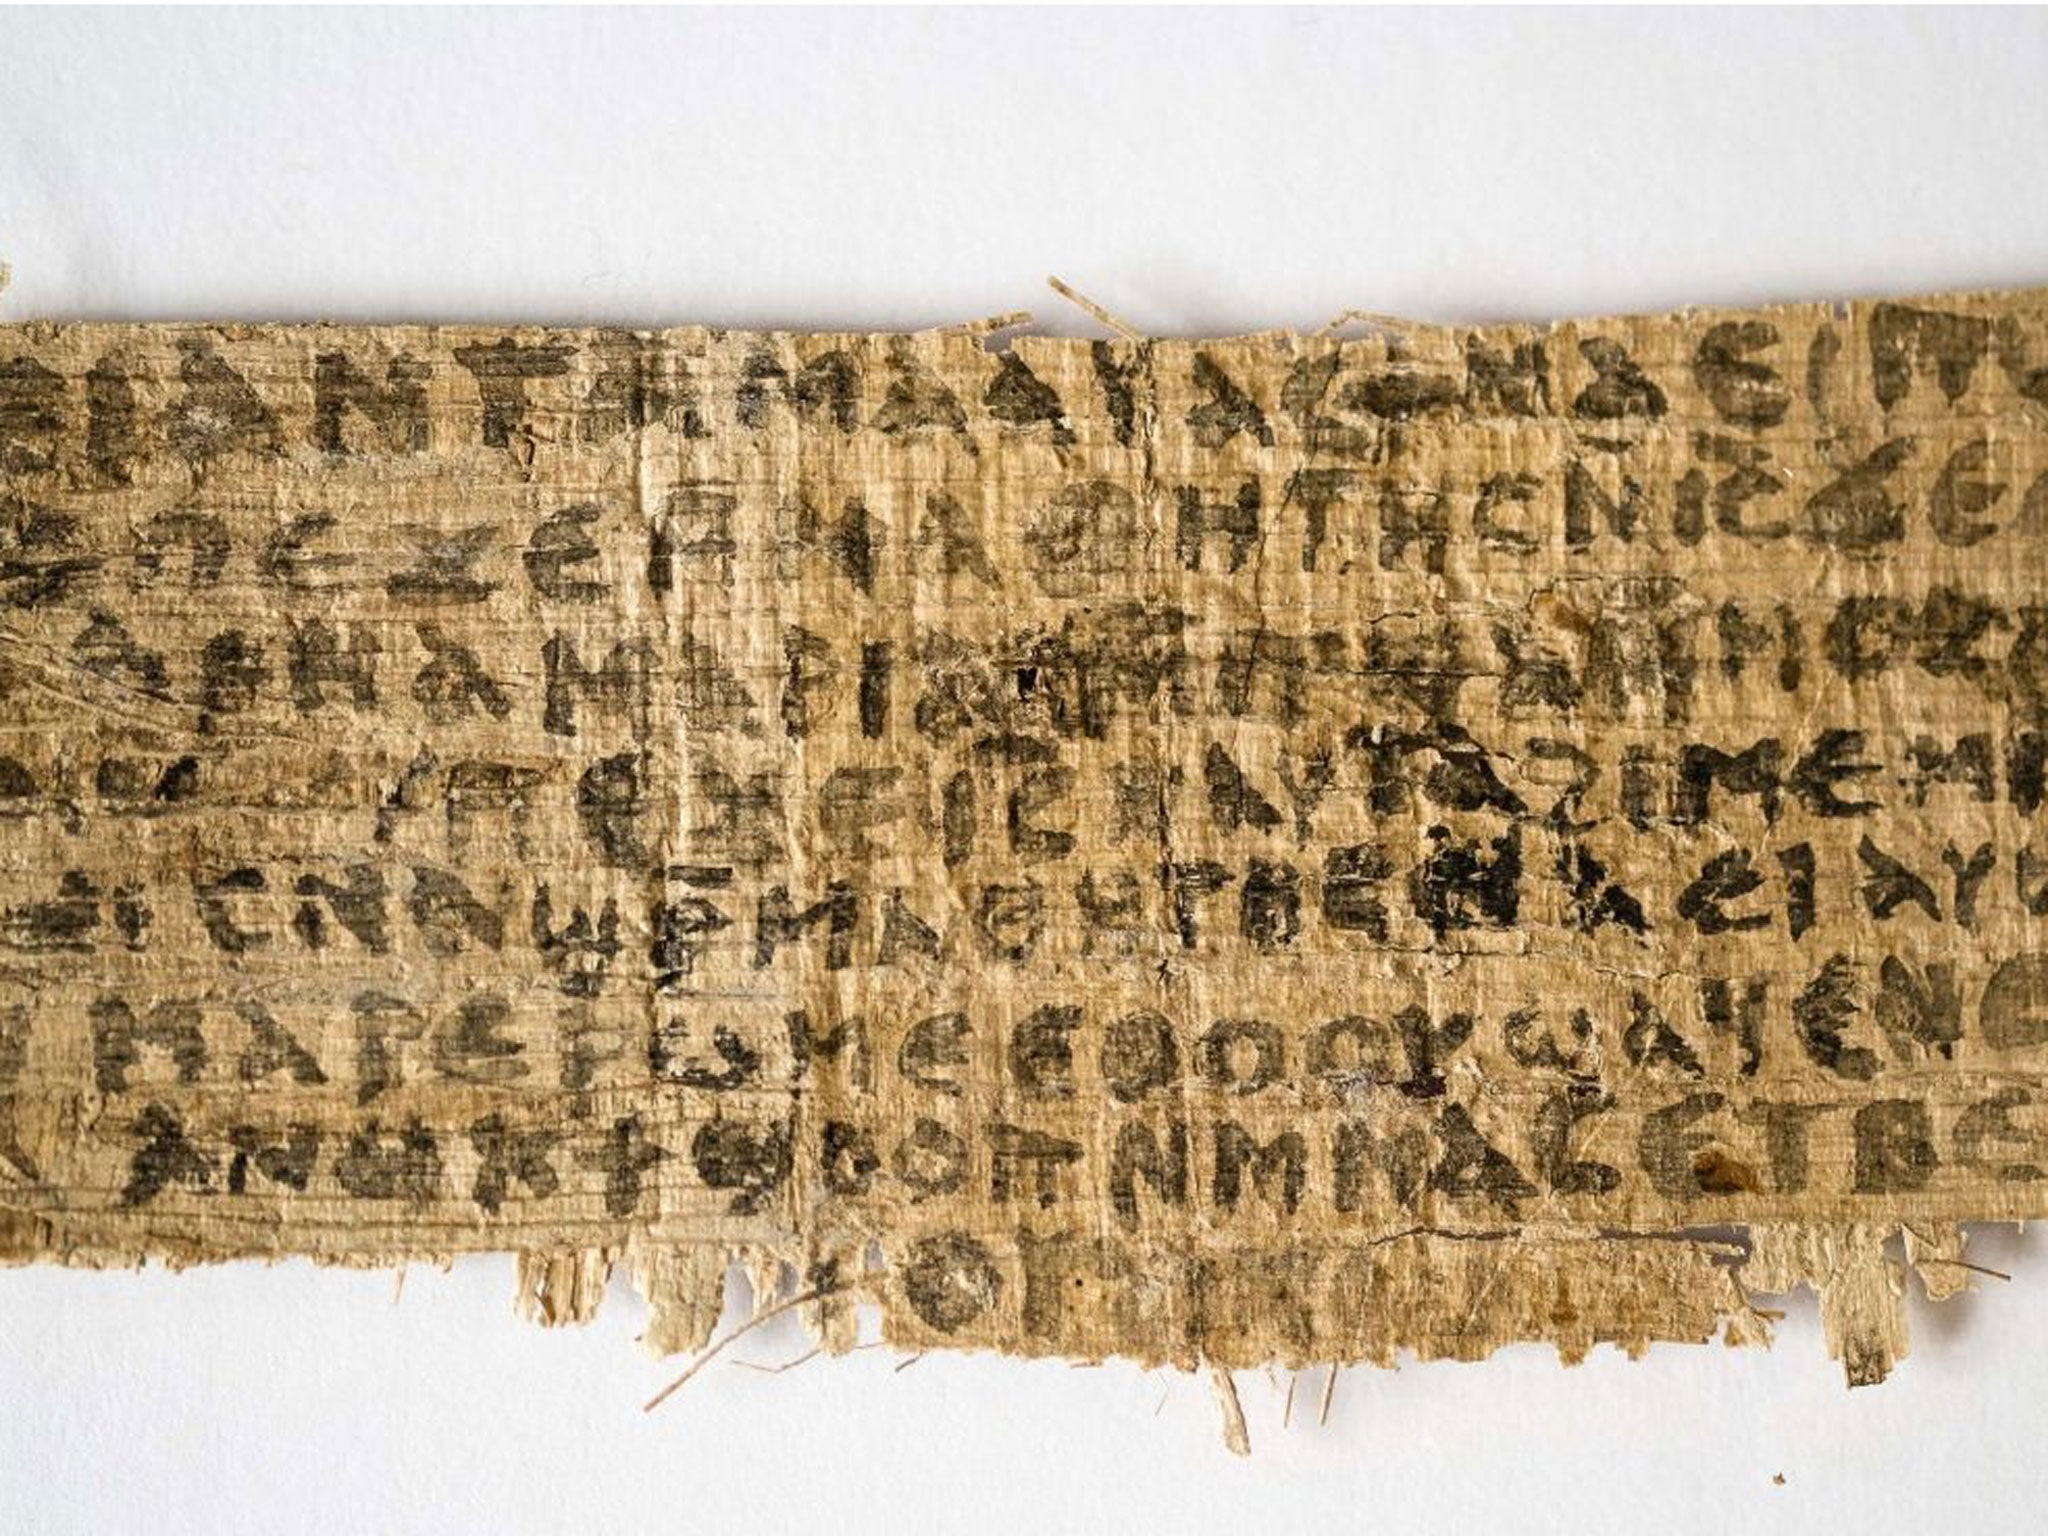 The Gospel of Jesus' wife: File photo released by Harvard University shows a fragment of papyrus that divinity professor Karen L. King said is the only existing ancient text that quotes Jesus explicitly referring to having a wife.